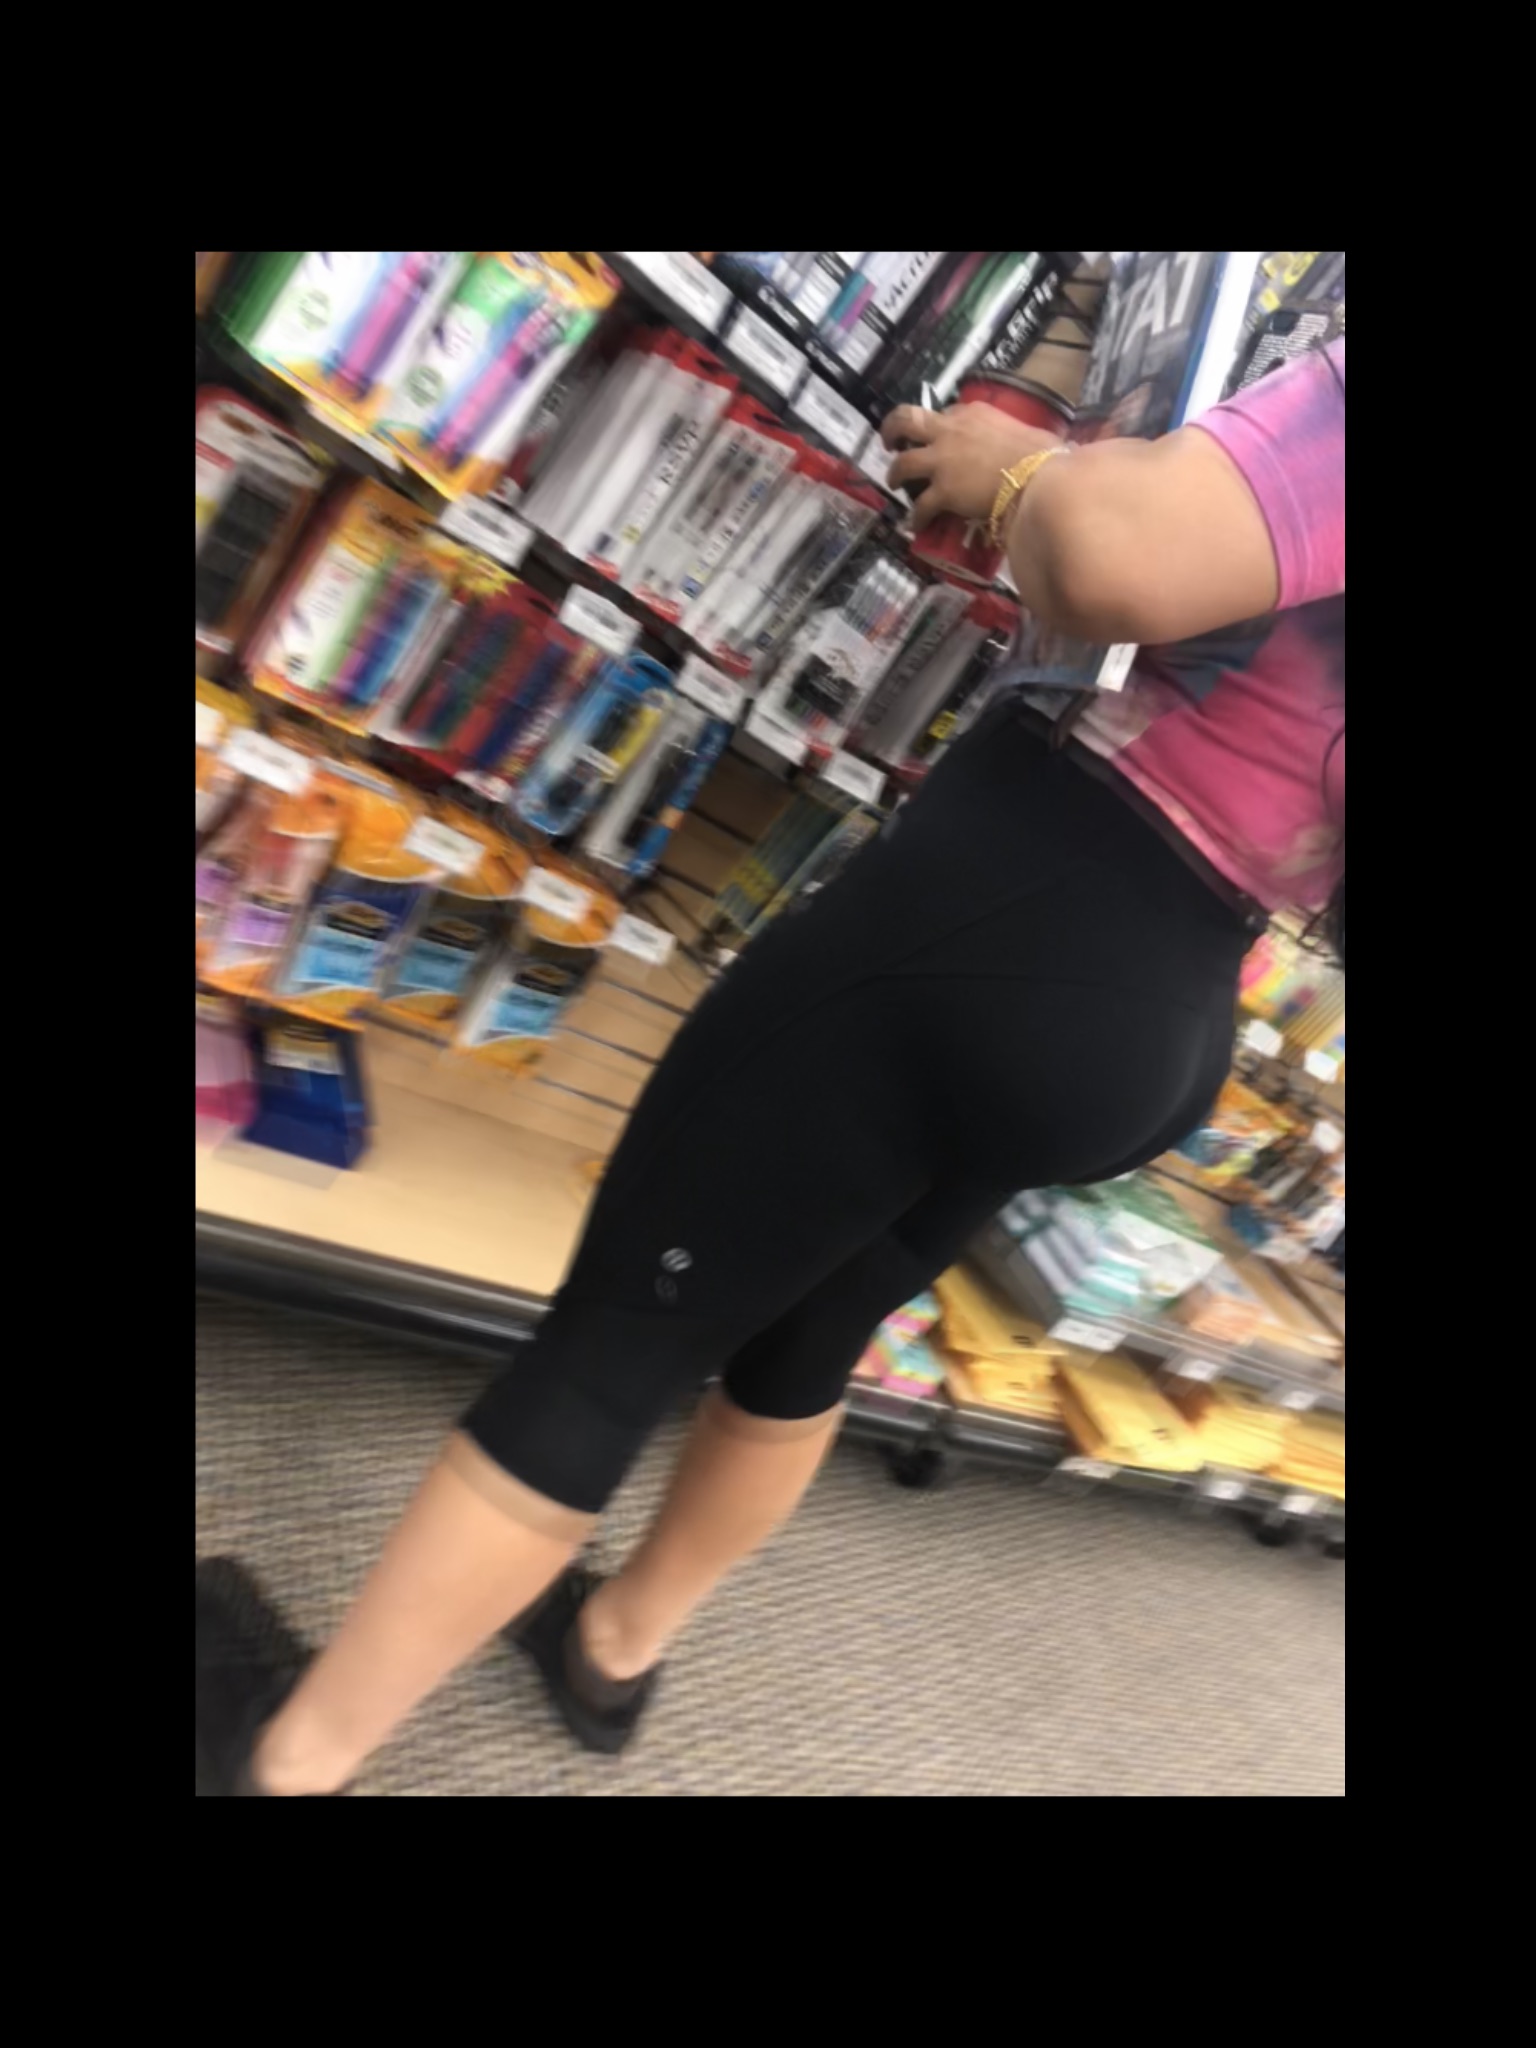 Big ass at college store